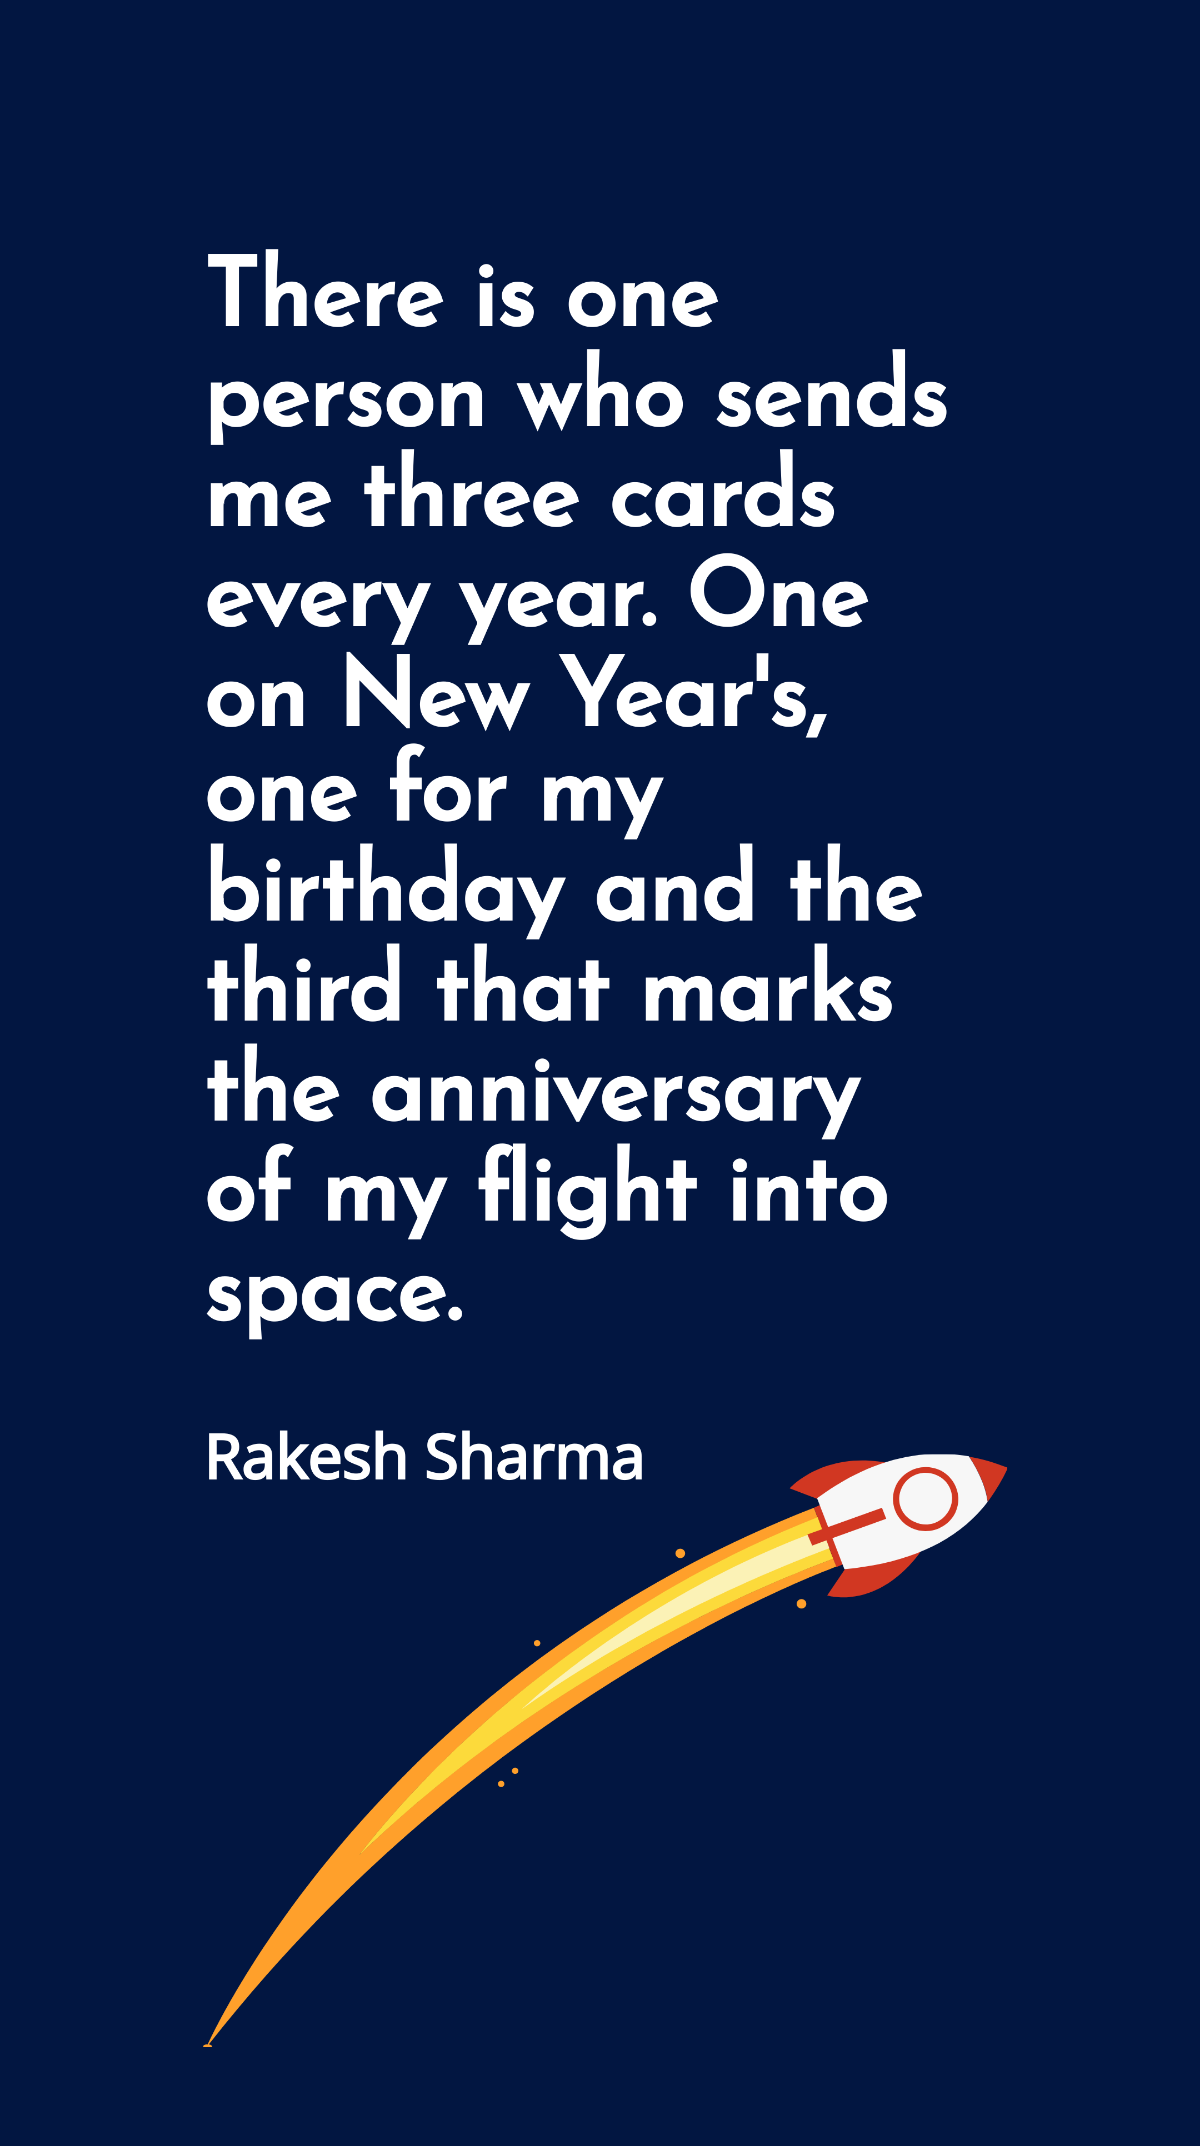 Free Rakesh Sharma - There is one person who sends me three cards every year. One on New Year's, one for my birthday and the third that marks the anniversary of my flight into space. Template